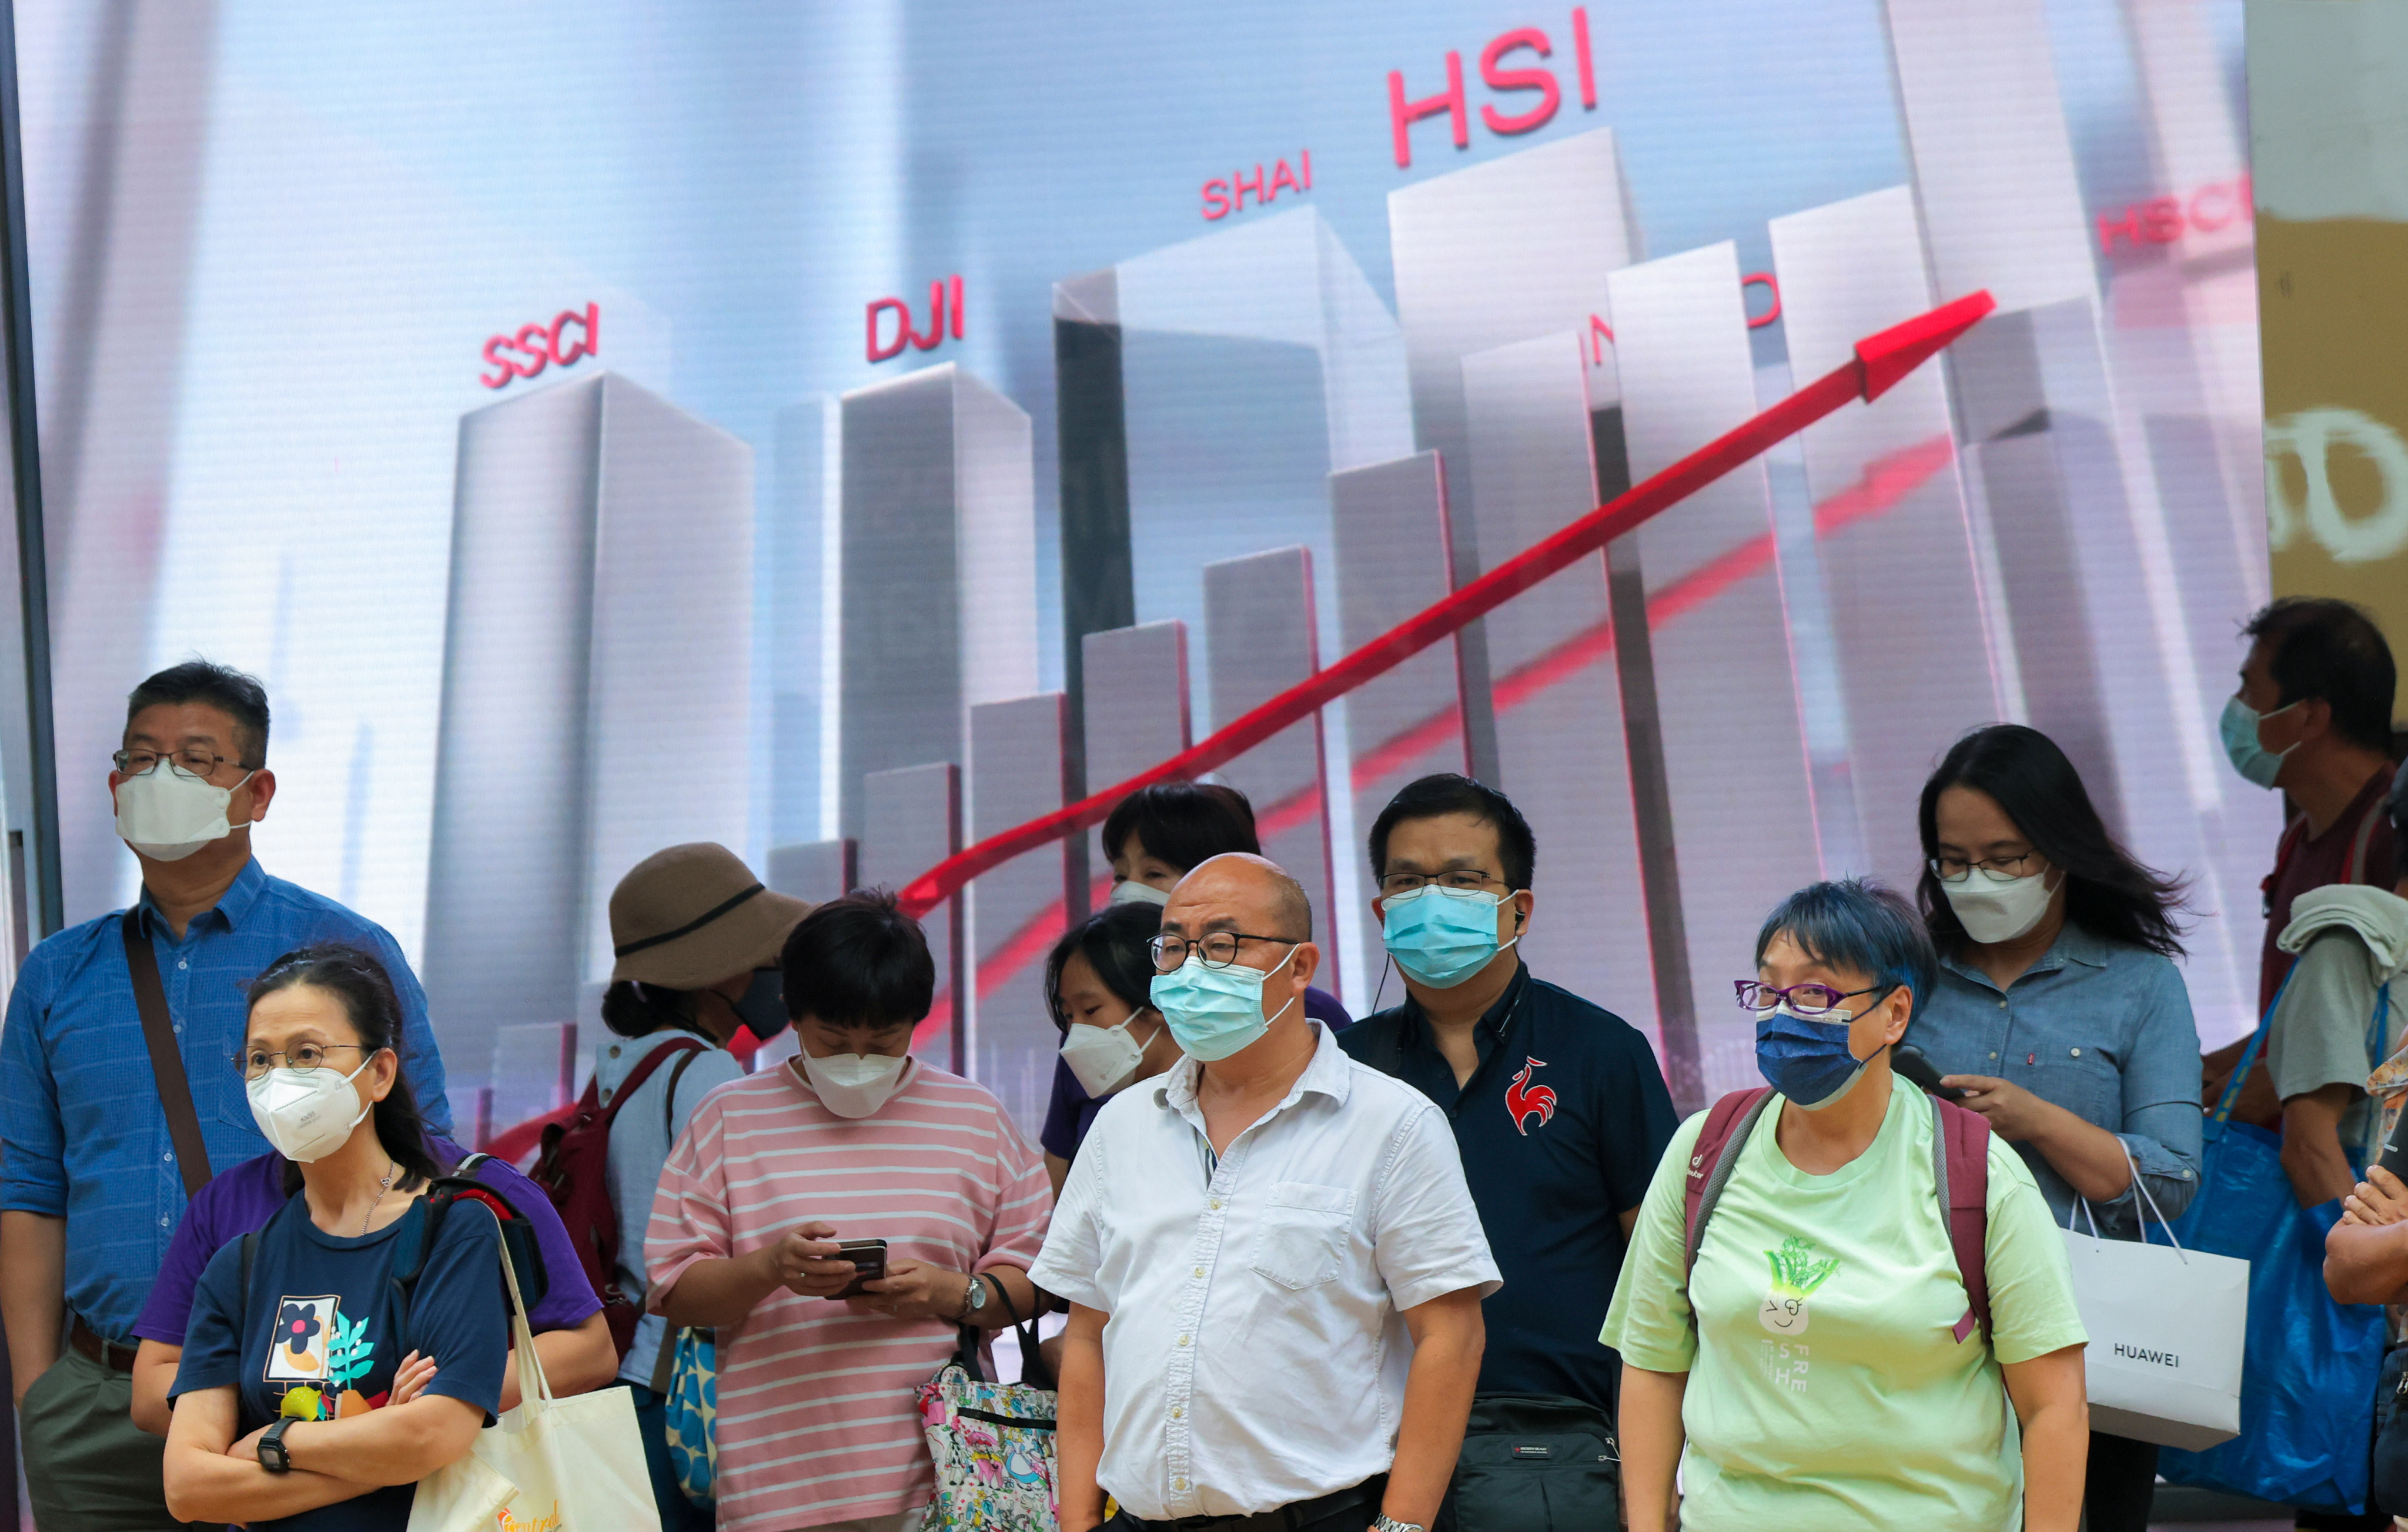 Stock market investments are extremely popular among investors in Hong Kong. Photo: Jelly Tse